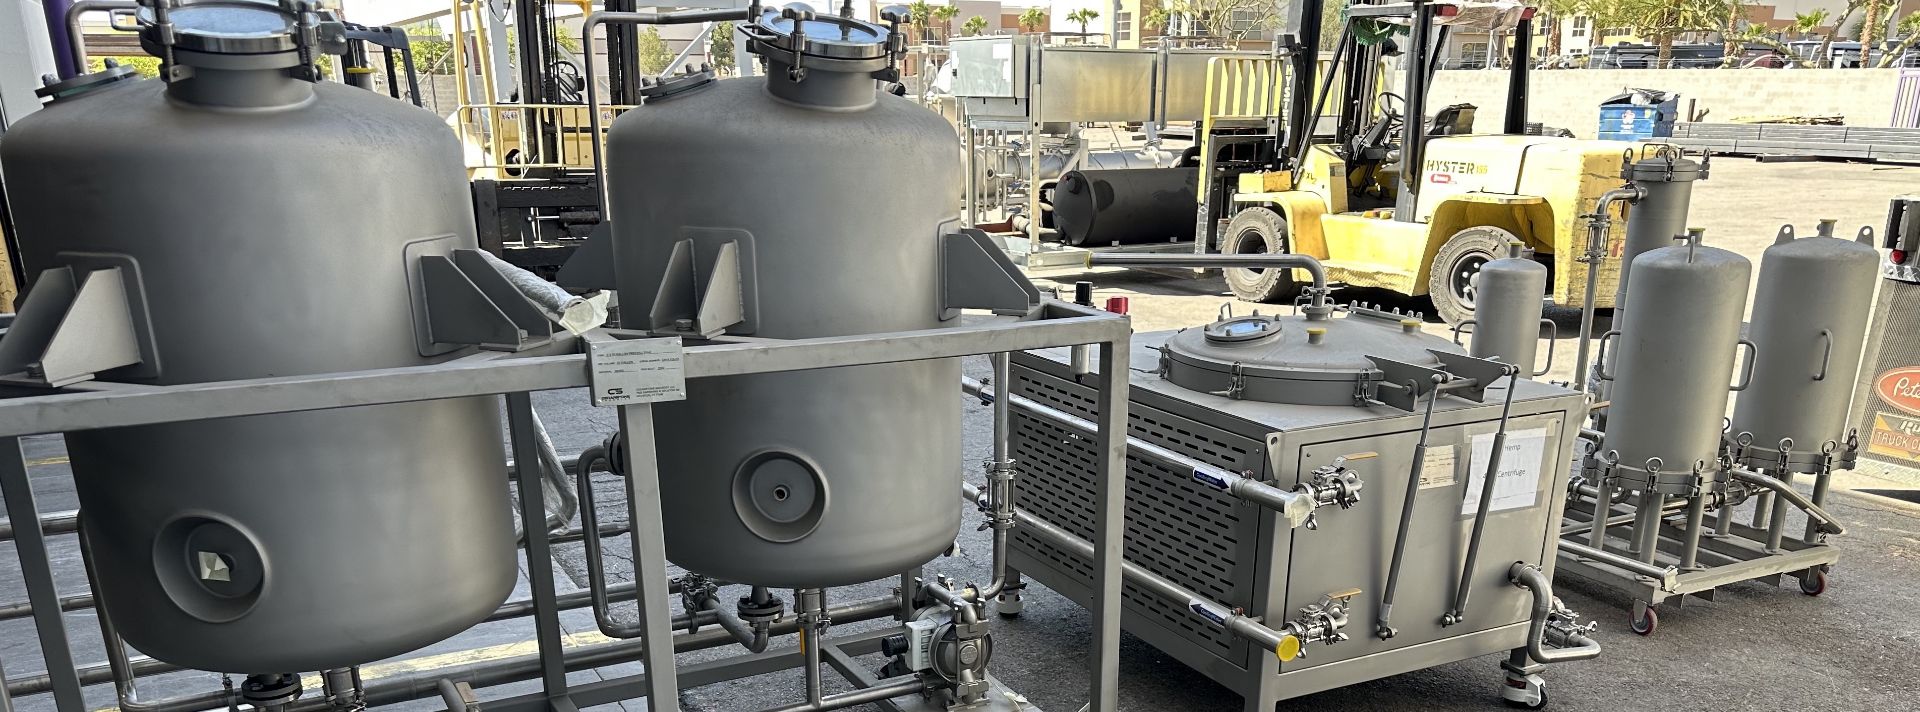 Unused Cedarstone Complete Ethanol Extraction Line w/ FFE, Filtration Skid, Centrifuge System EX200. - Image 4 of 89